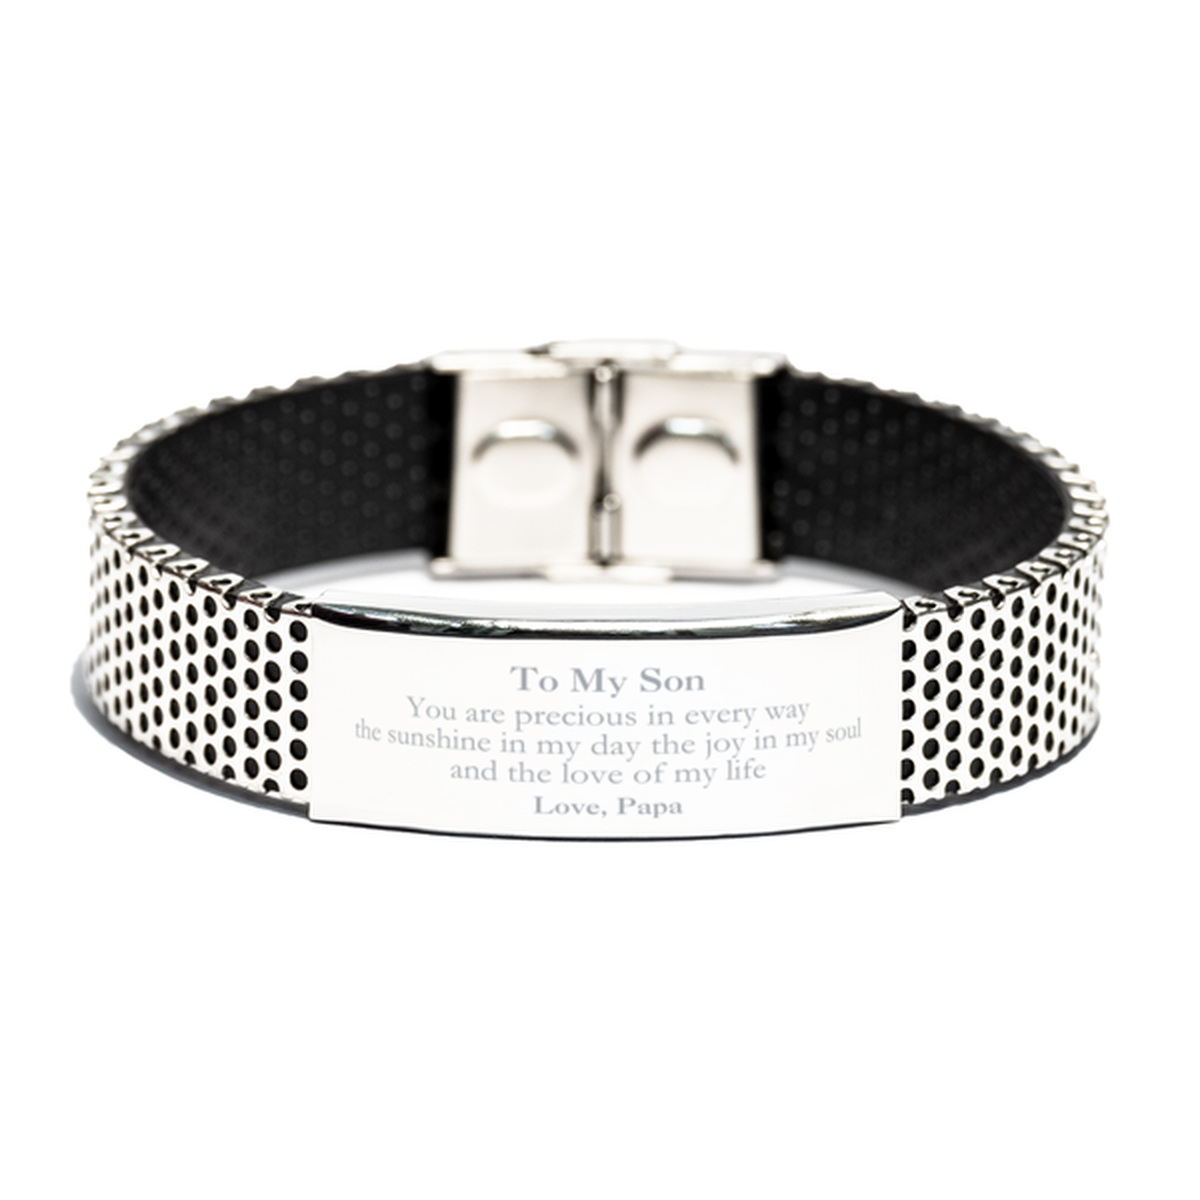 Graduation Gifts for Son Stainless Steel Bracelet Present from Papa, Christmas Son Birthday Gifts Son You are precious in every way the sunshine in my day. Love, Papa